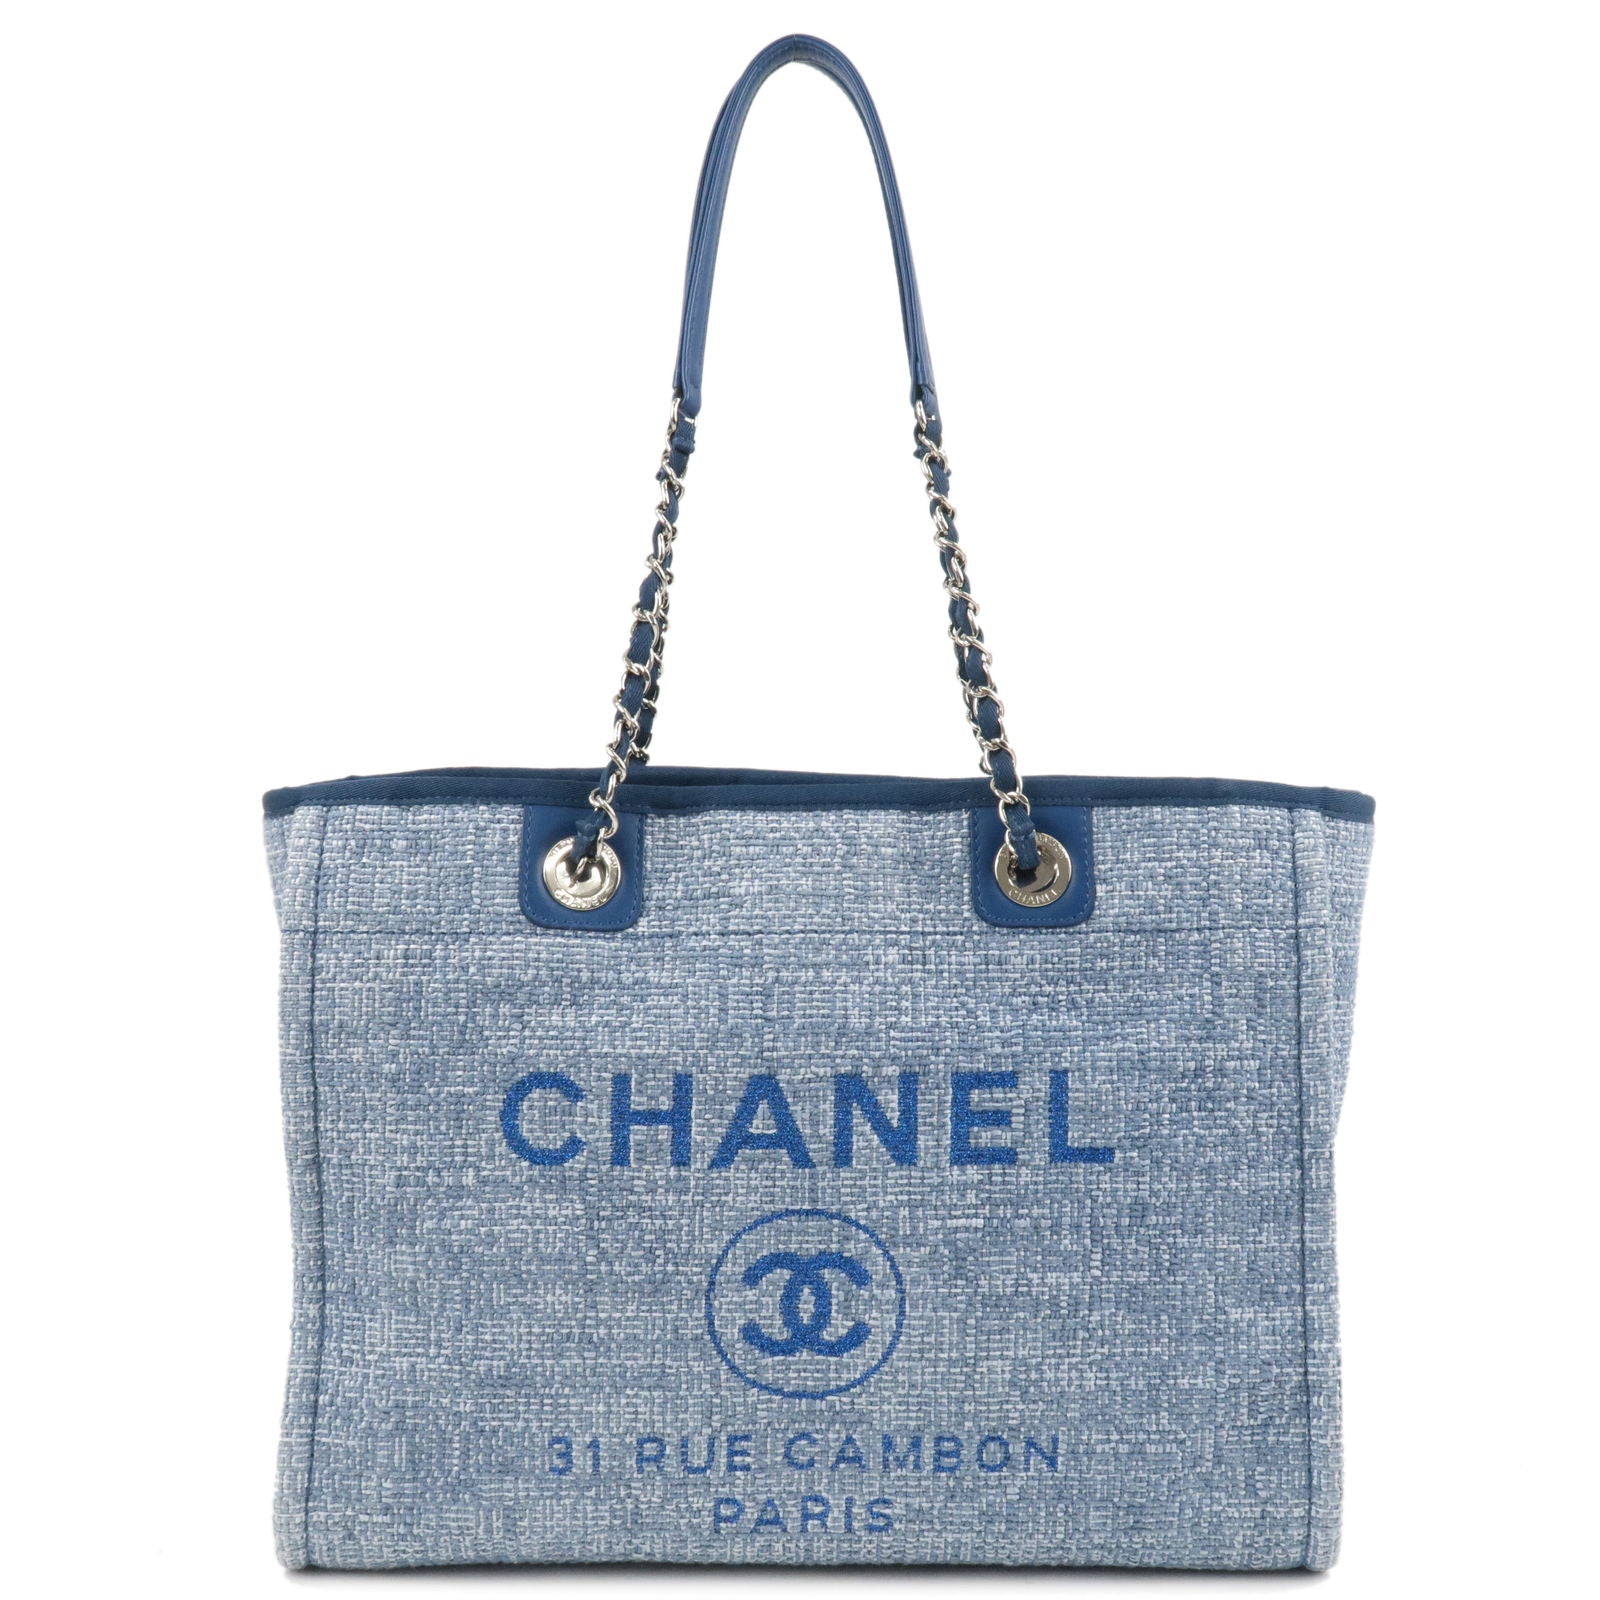 Get To Know: The Chanel Deauville - Shoppable now at Love that Bag etc